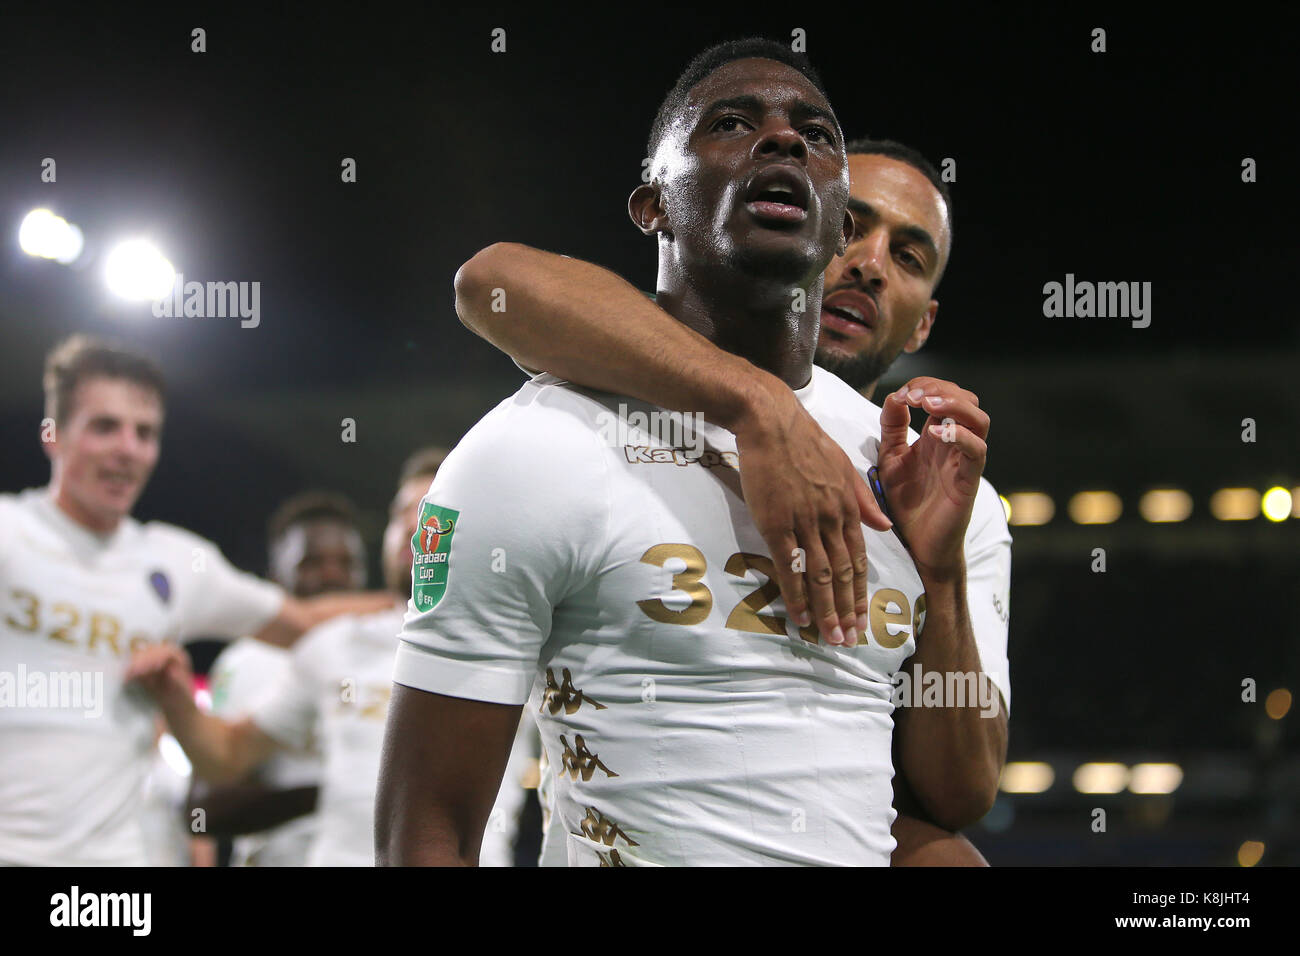 Leeds United's Hadi Sacko celebrates scoring his side's first goal of the game during the Carabao Cup, third round match at Turf Moor, Burnley. Stock Photo